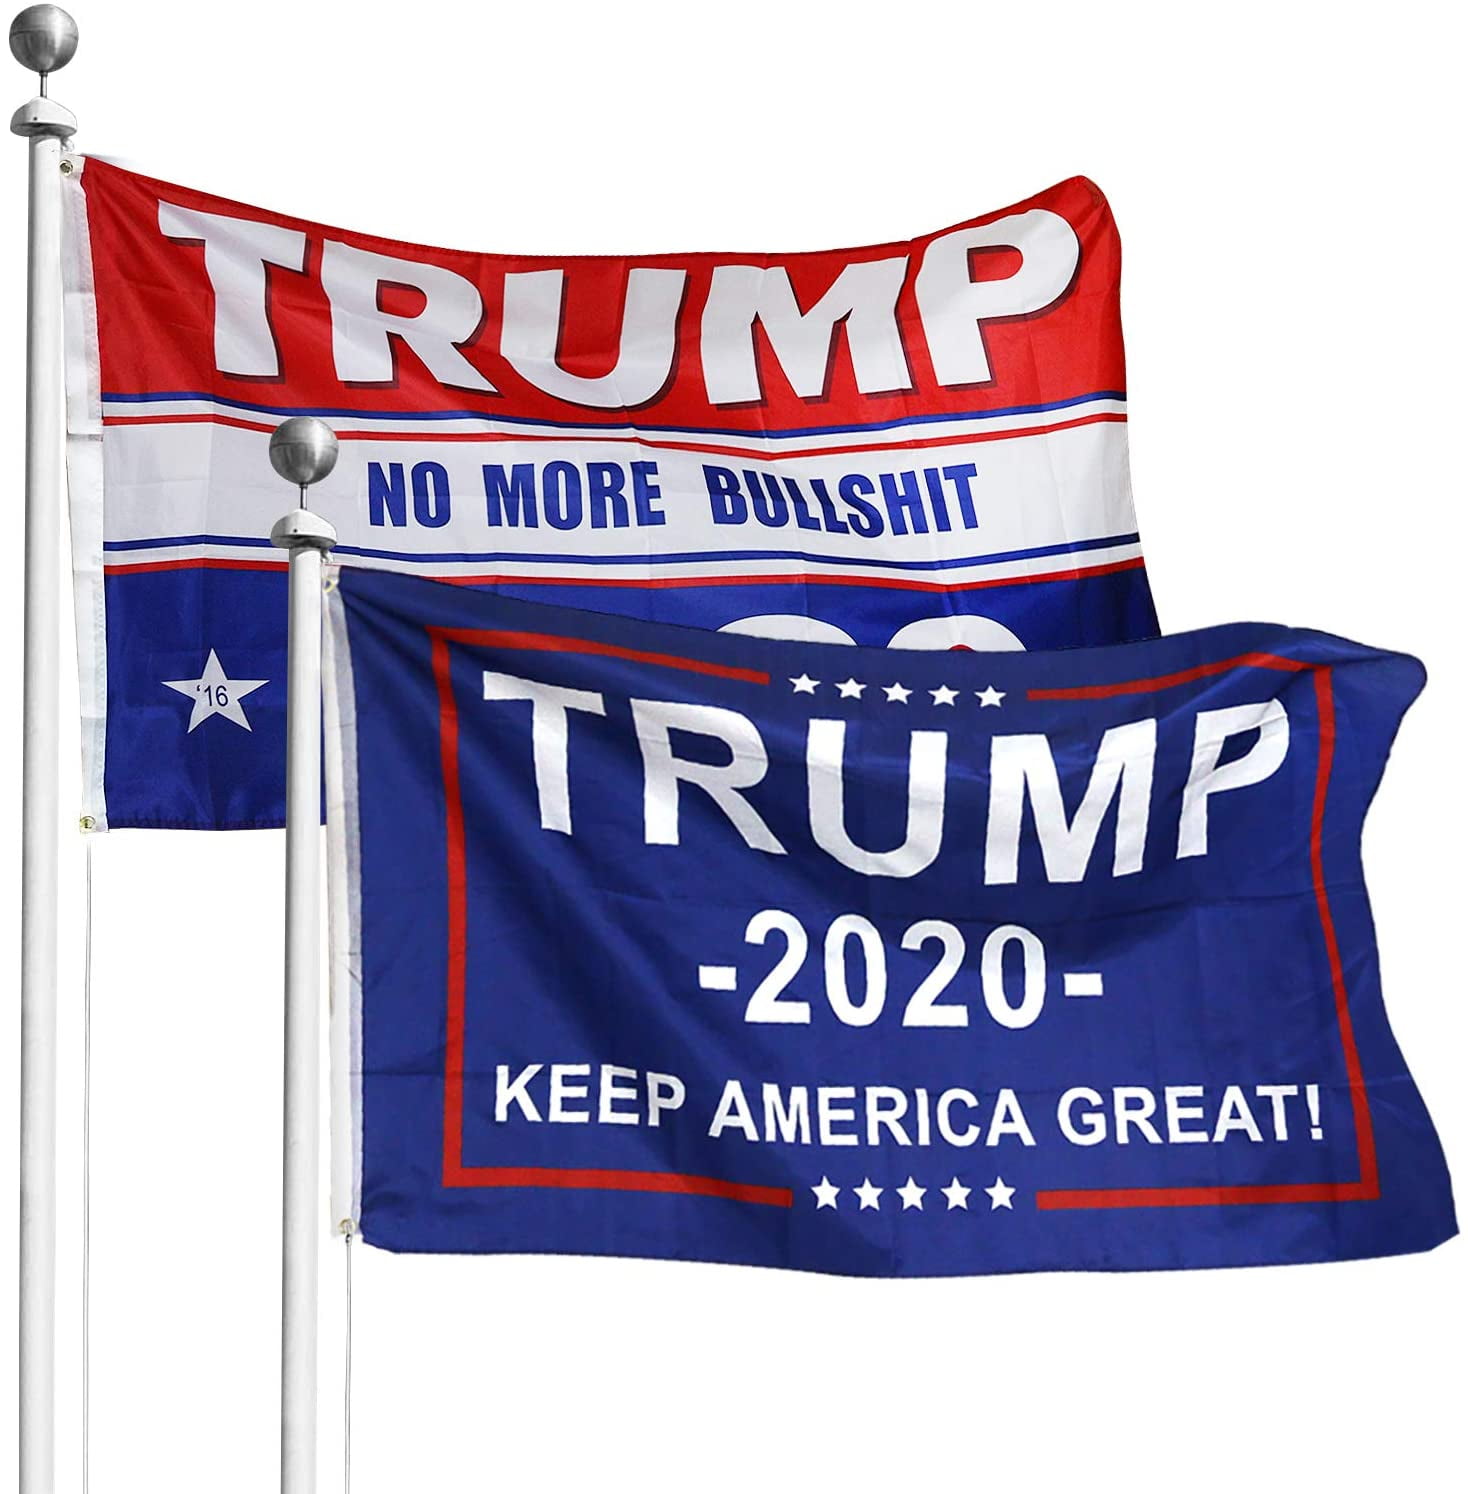 TRuMP 2020 NO MoRE BULLSHiT BS large FLAG 3' by 5' with FREE SHIPPING StiCKeR!